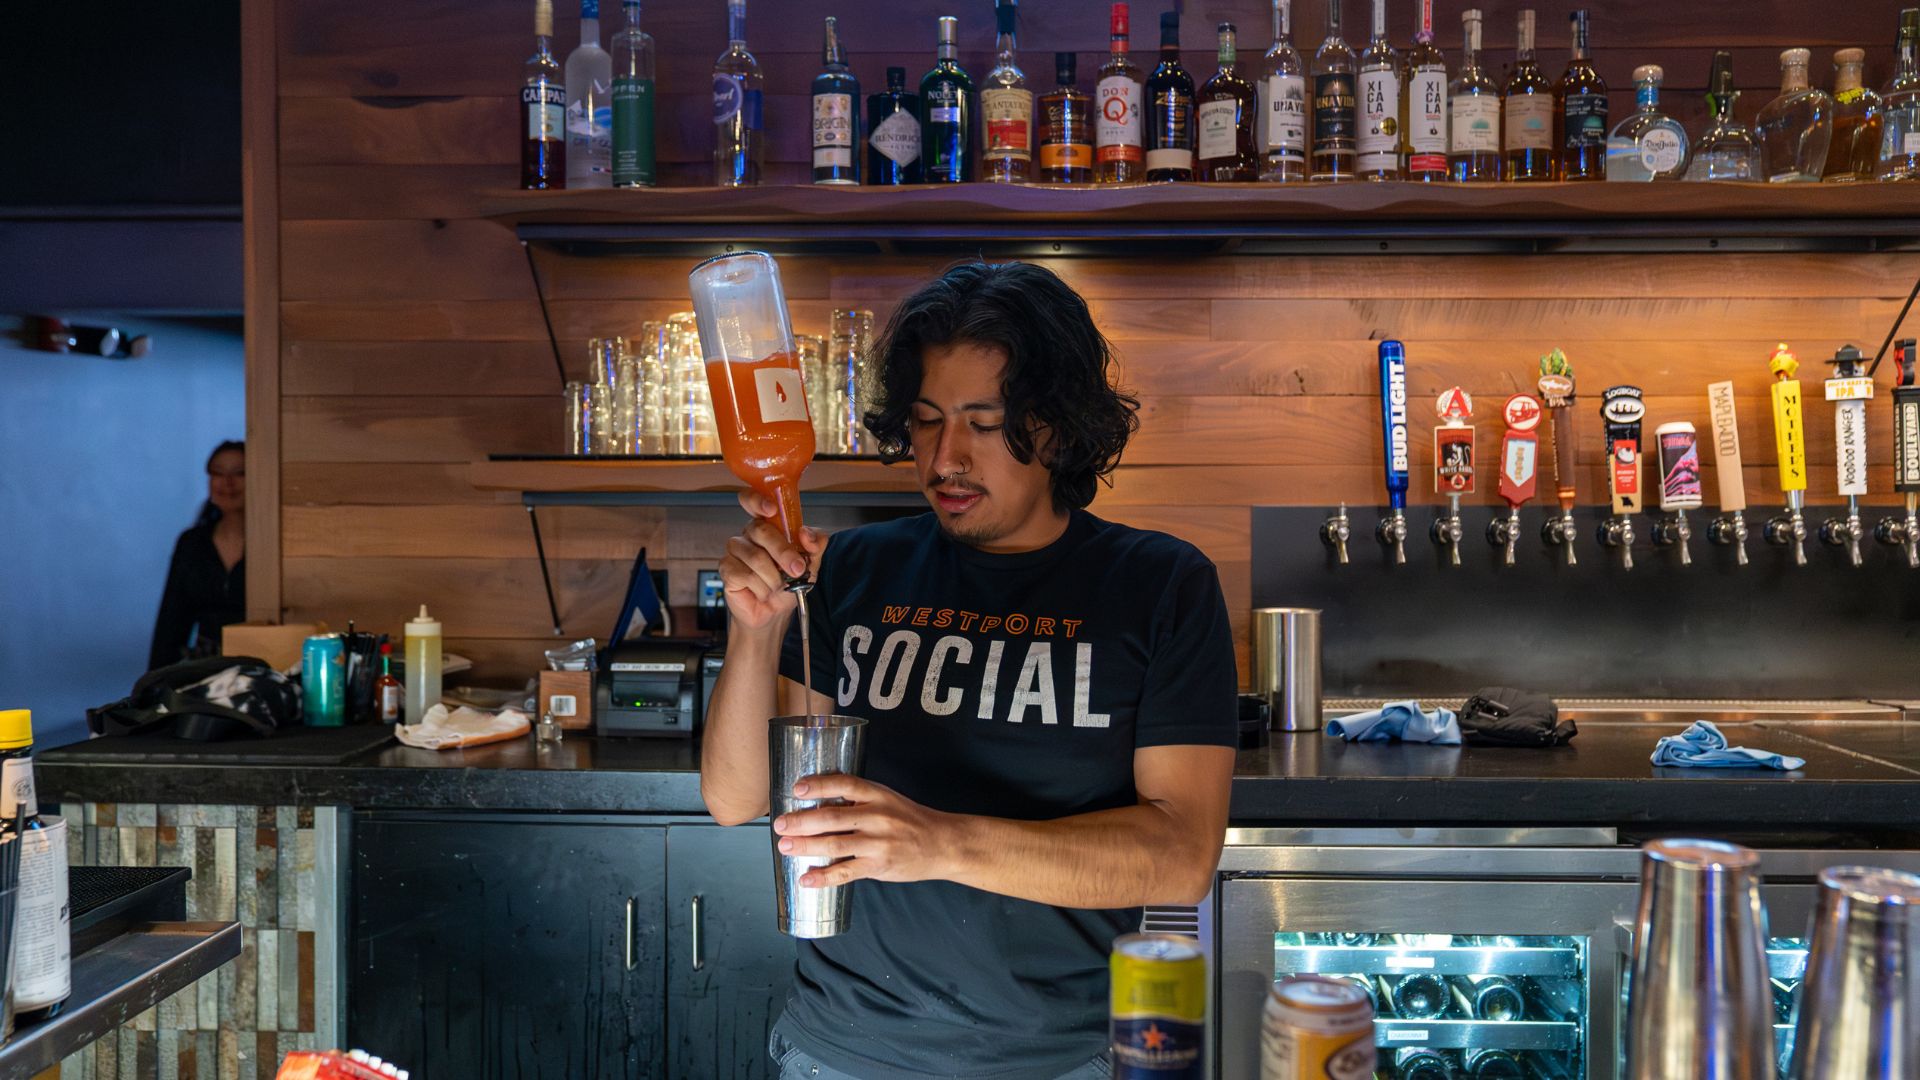 Oliver Tizpantizi-Serrano pours a drink behind the bar at Westport Social in St. Louis.